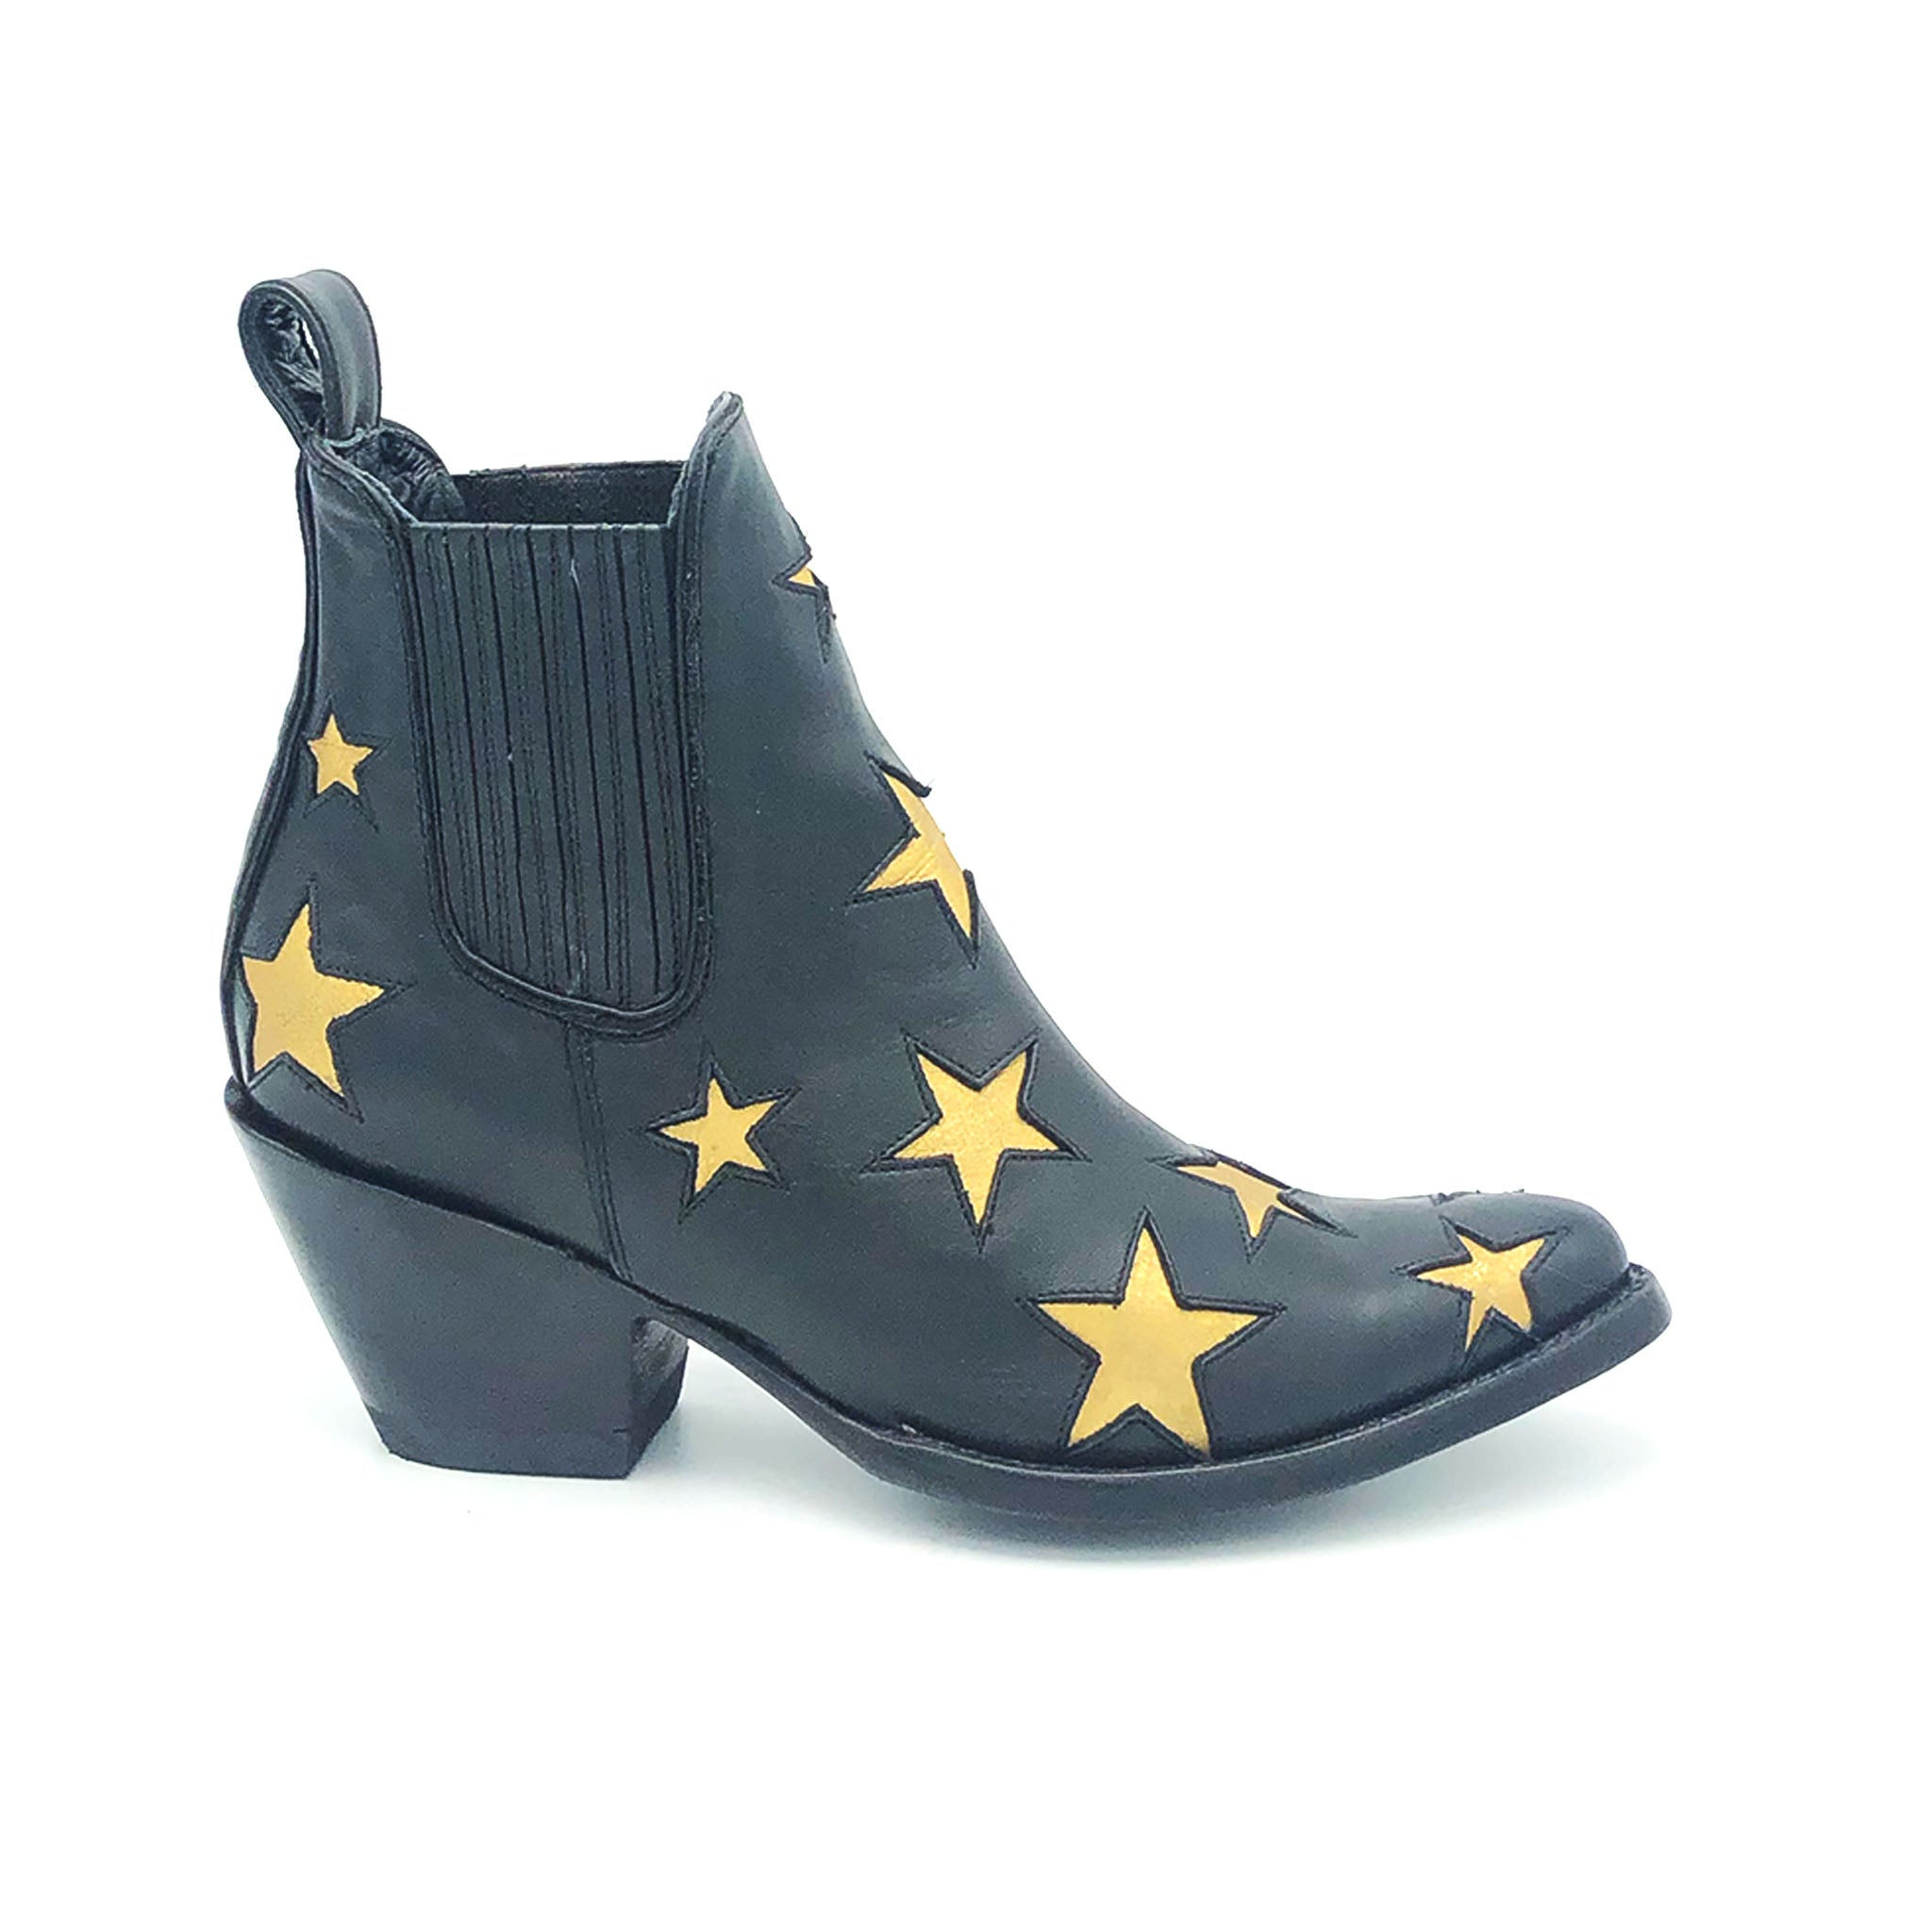 boots with stars on them